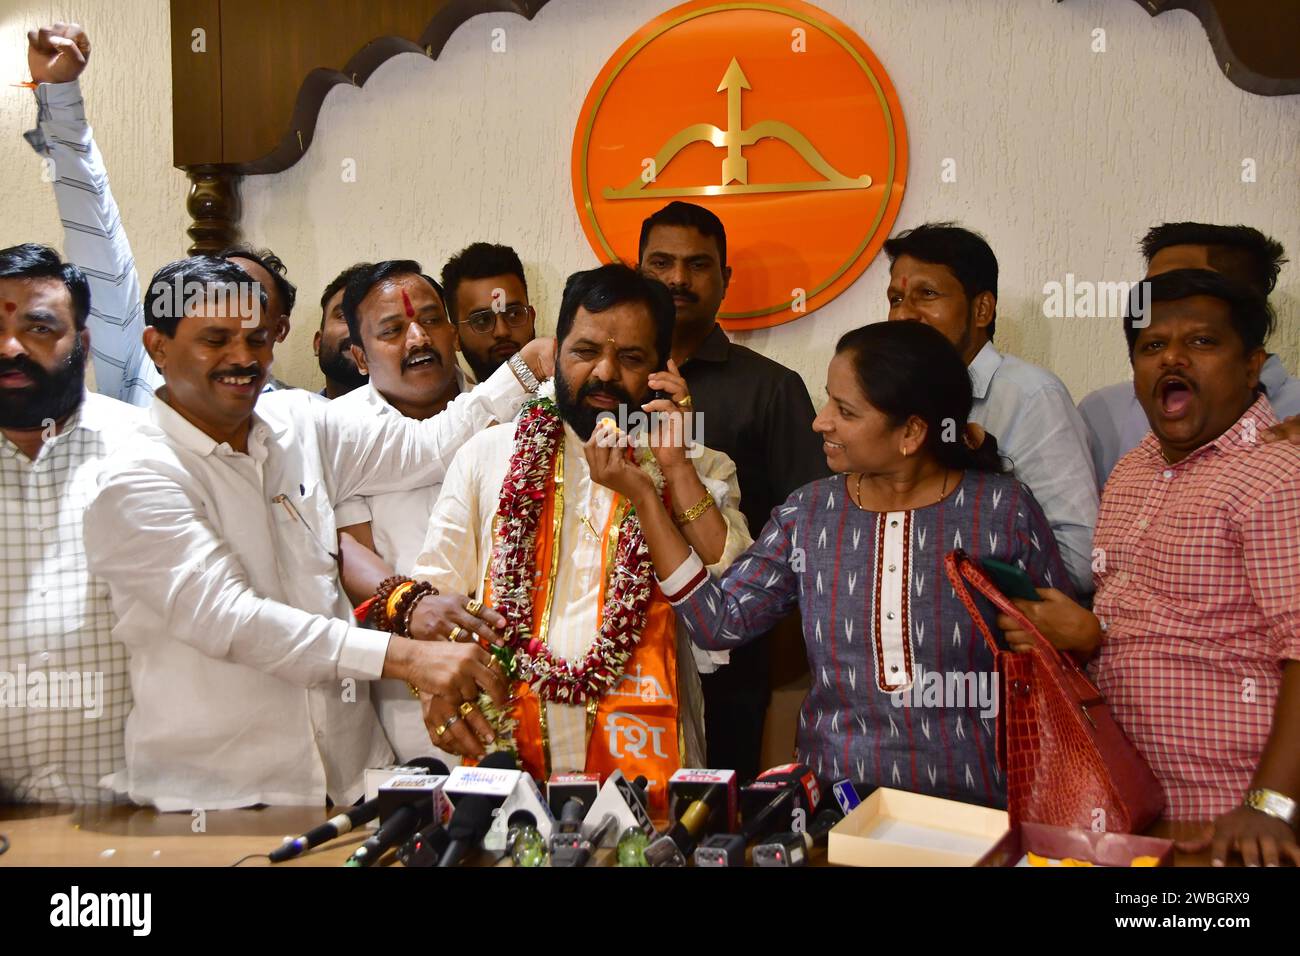 MUMBAI, INDIA - JANUARY 10: Shiv Sena (Shinde faction) MLA Bharat Gogawale with party leaders celebrate after the Shiv Sena MLA disqualification case verdict, at Balasaheb Bhavan on January 10, 2024 in Mumbai, India. The Maharashtra Legislative Assembly Speaker Rahul Narwekar today held that Eknath Shinde led faction was the real Shiv Sena when the rival faction emerged within the party on June 22, 2022. He has refused to disqualify any member from both the factions, led by Shinde and Uddhav Thackeray. Both the factions had filed 34 petitions against each other before the speaker in 2022, se Stock Photo